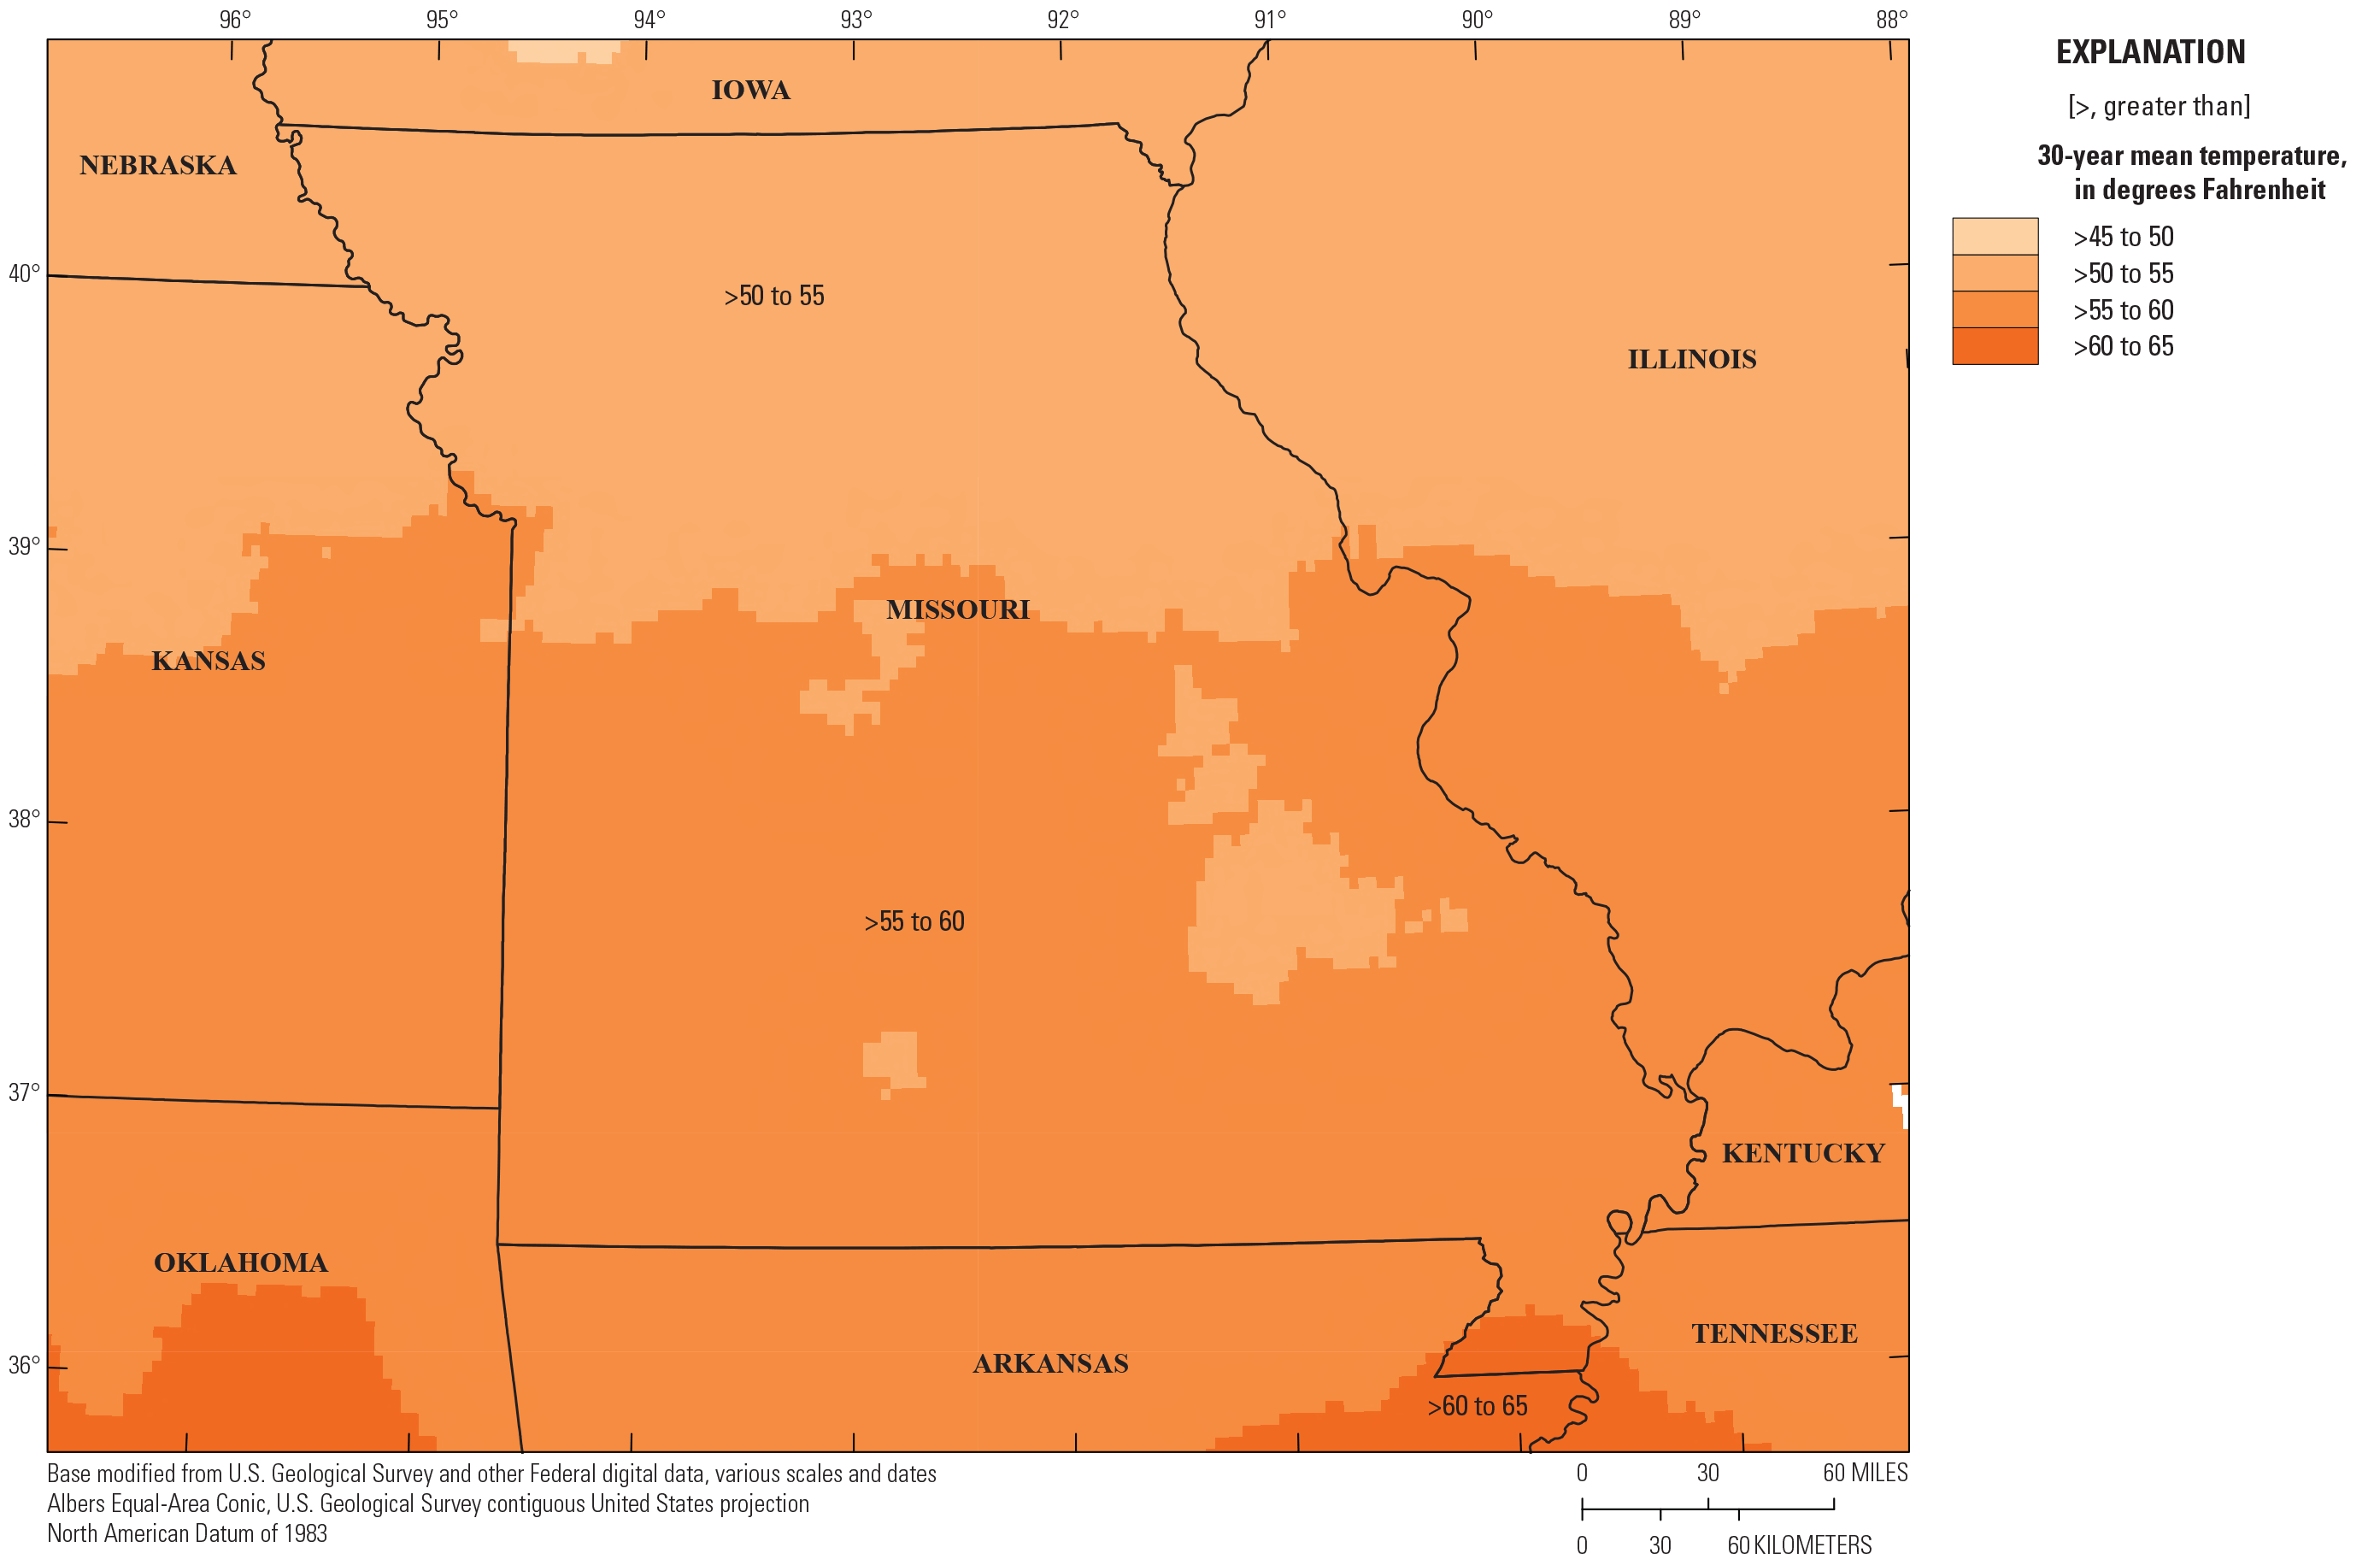 30-year mean annual temperature in Missouri, which increases towards the southeast.